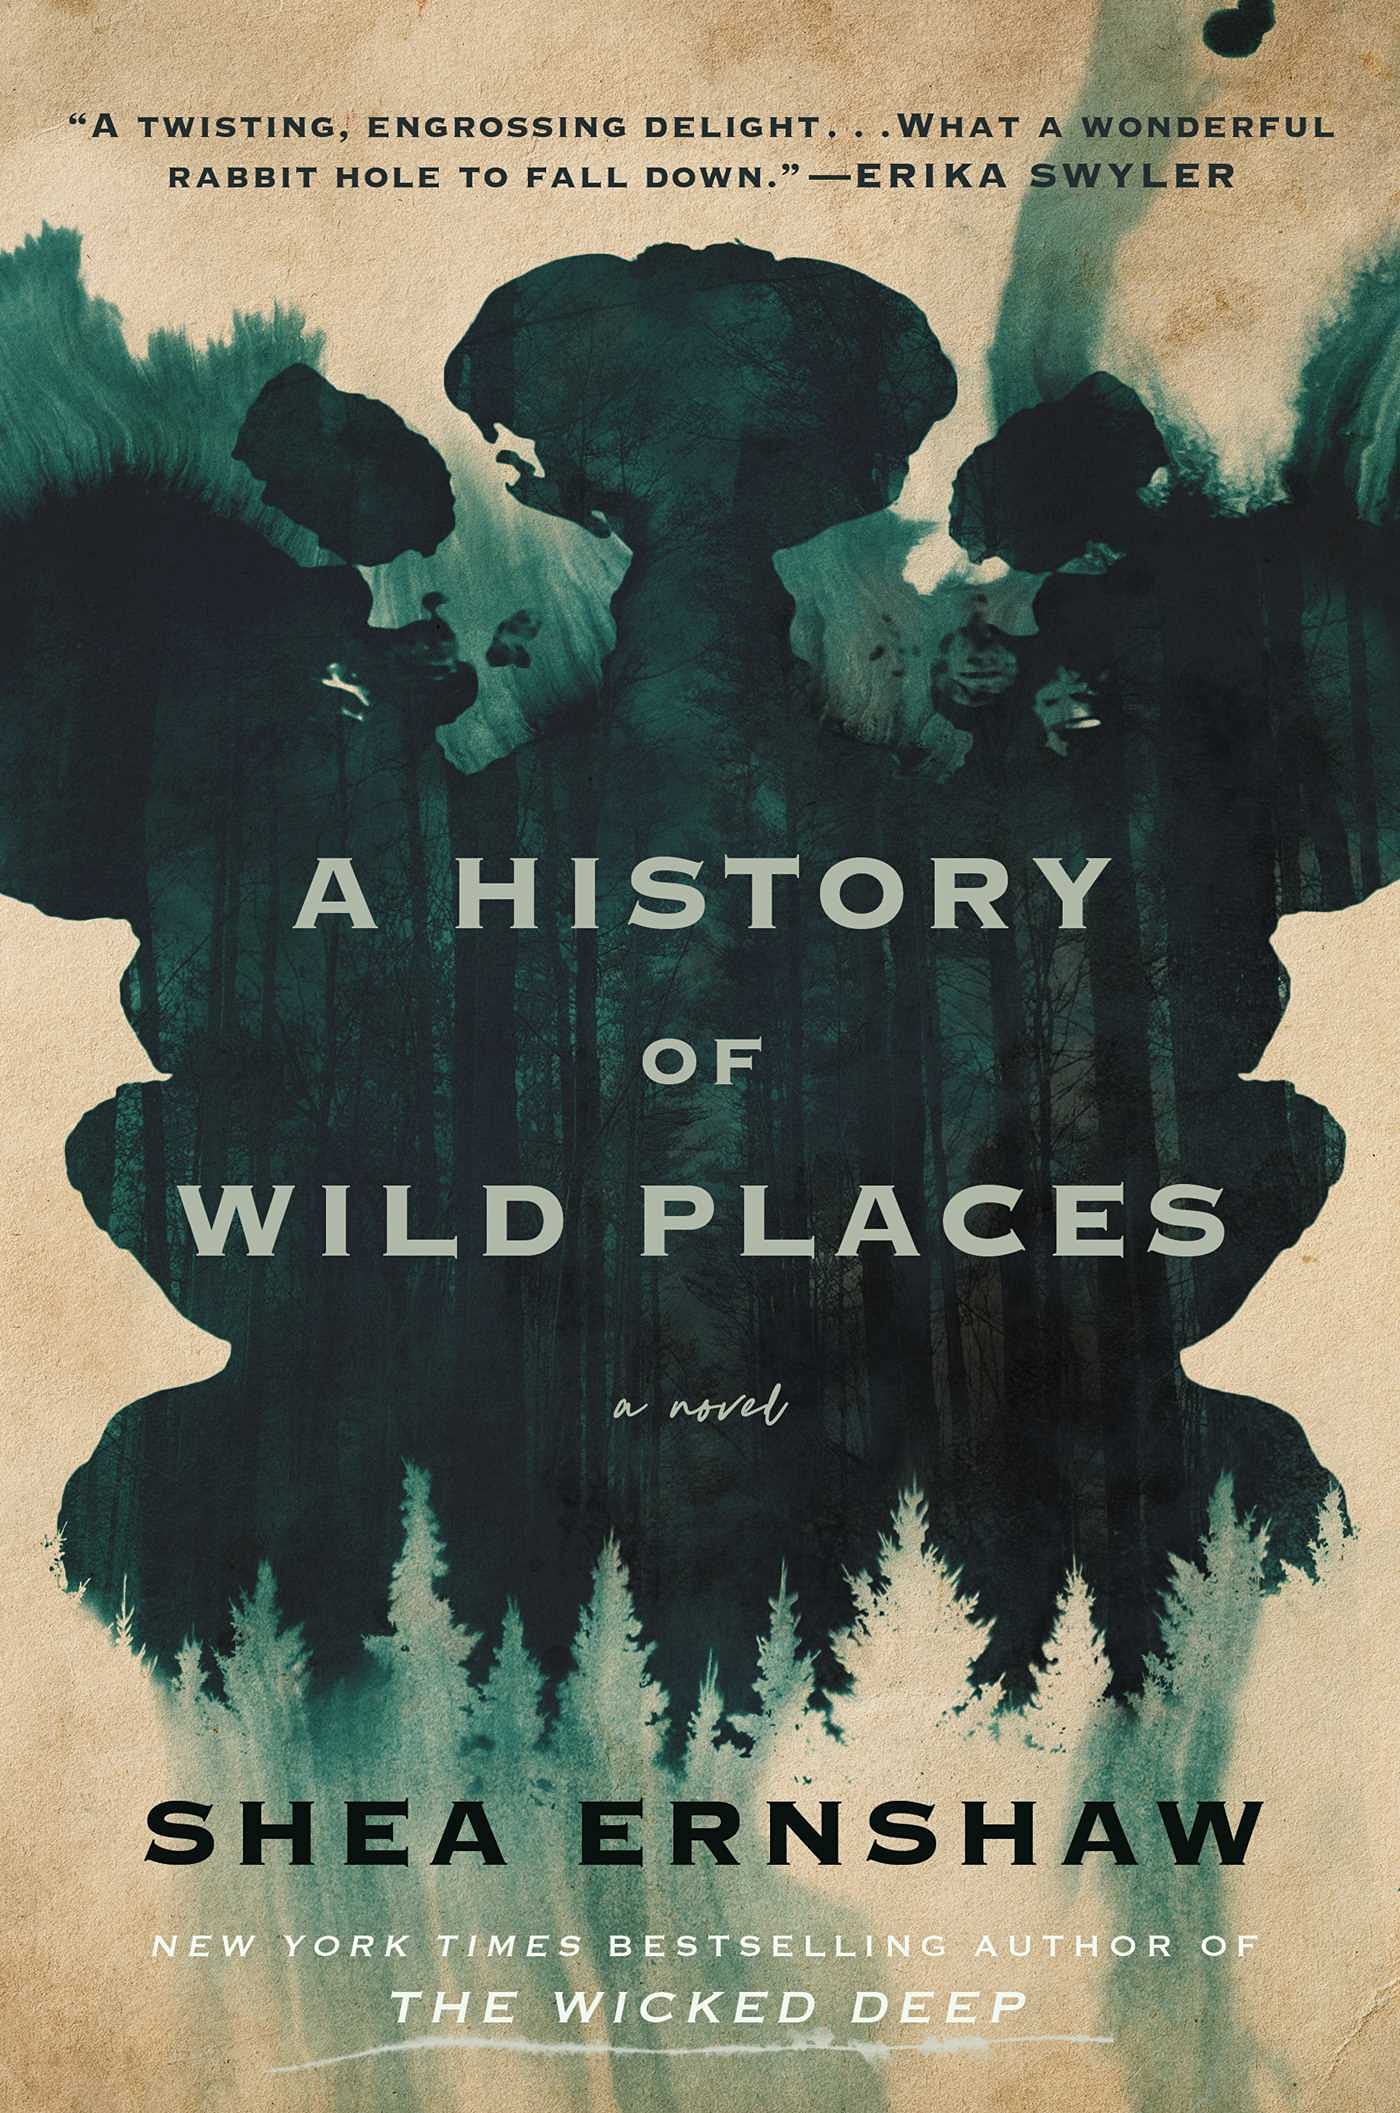 Cover of “A History of Wild Places” by Shea Ernshaw